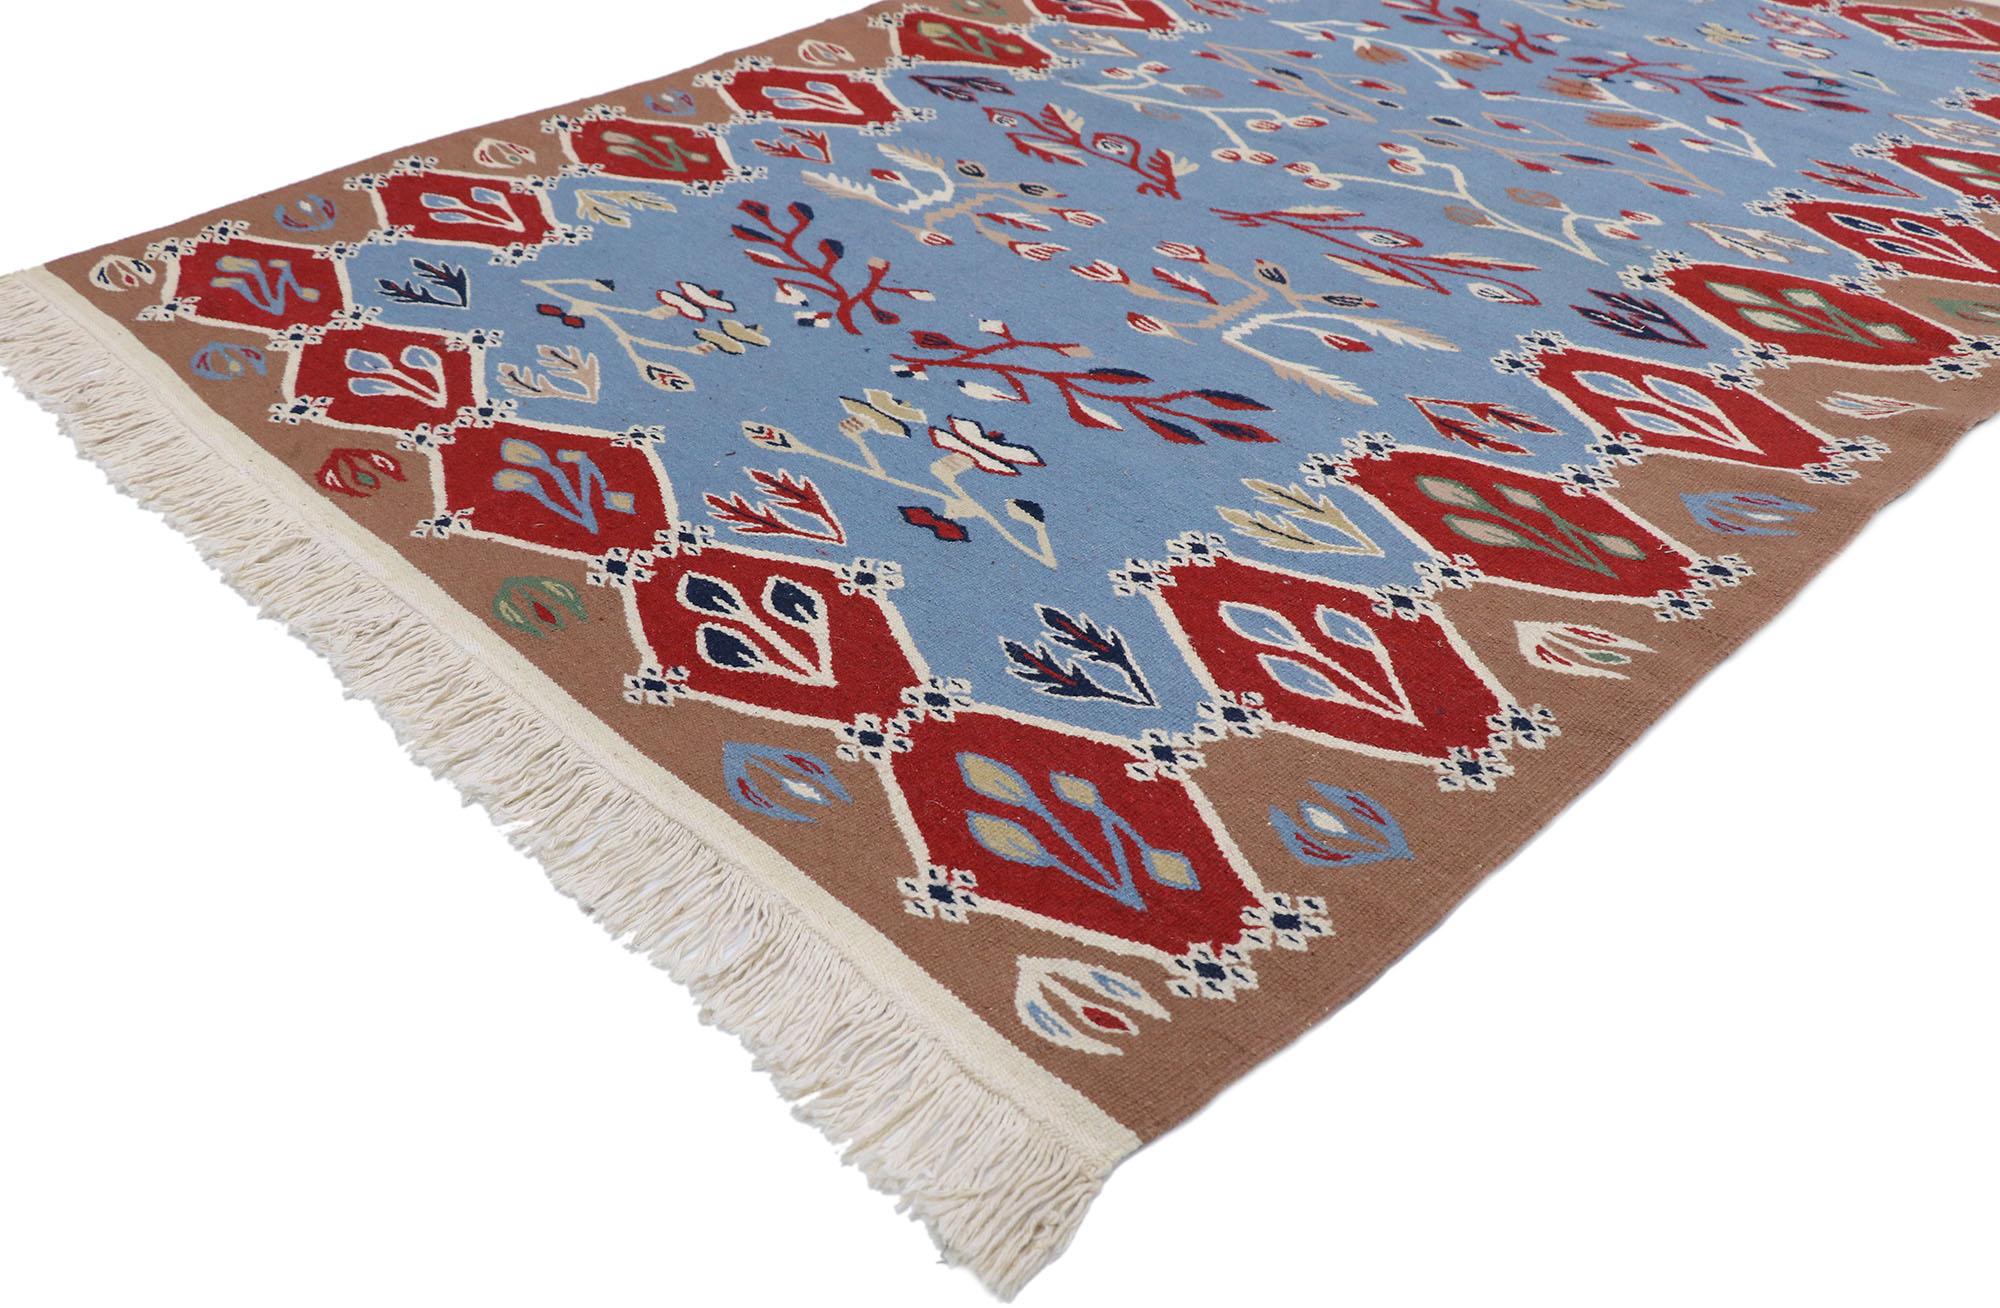 78048 Vintage Romanian Bessarabian Kilim rug with Folk Art Style 04'01 x 05'11. Delicately feminine and beautifully traditional, this hand-woven wool vintage Romanian floral kilim rug is poised to impress. The sky blue abrashed field features an